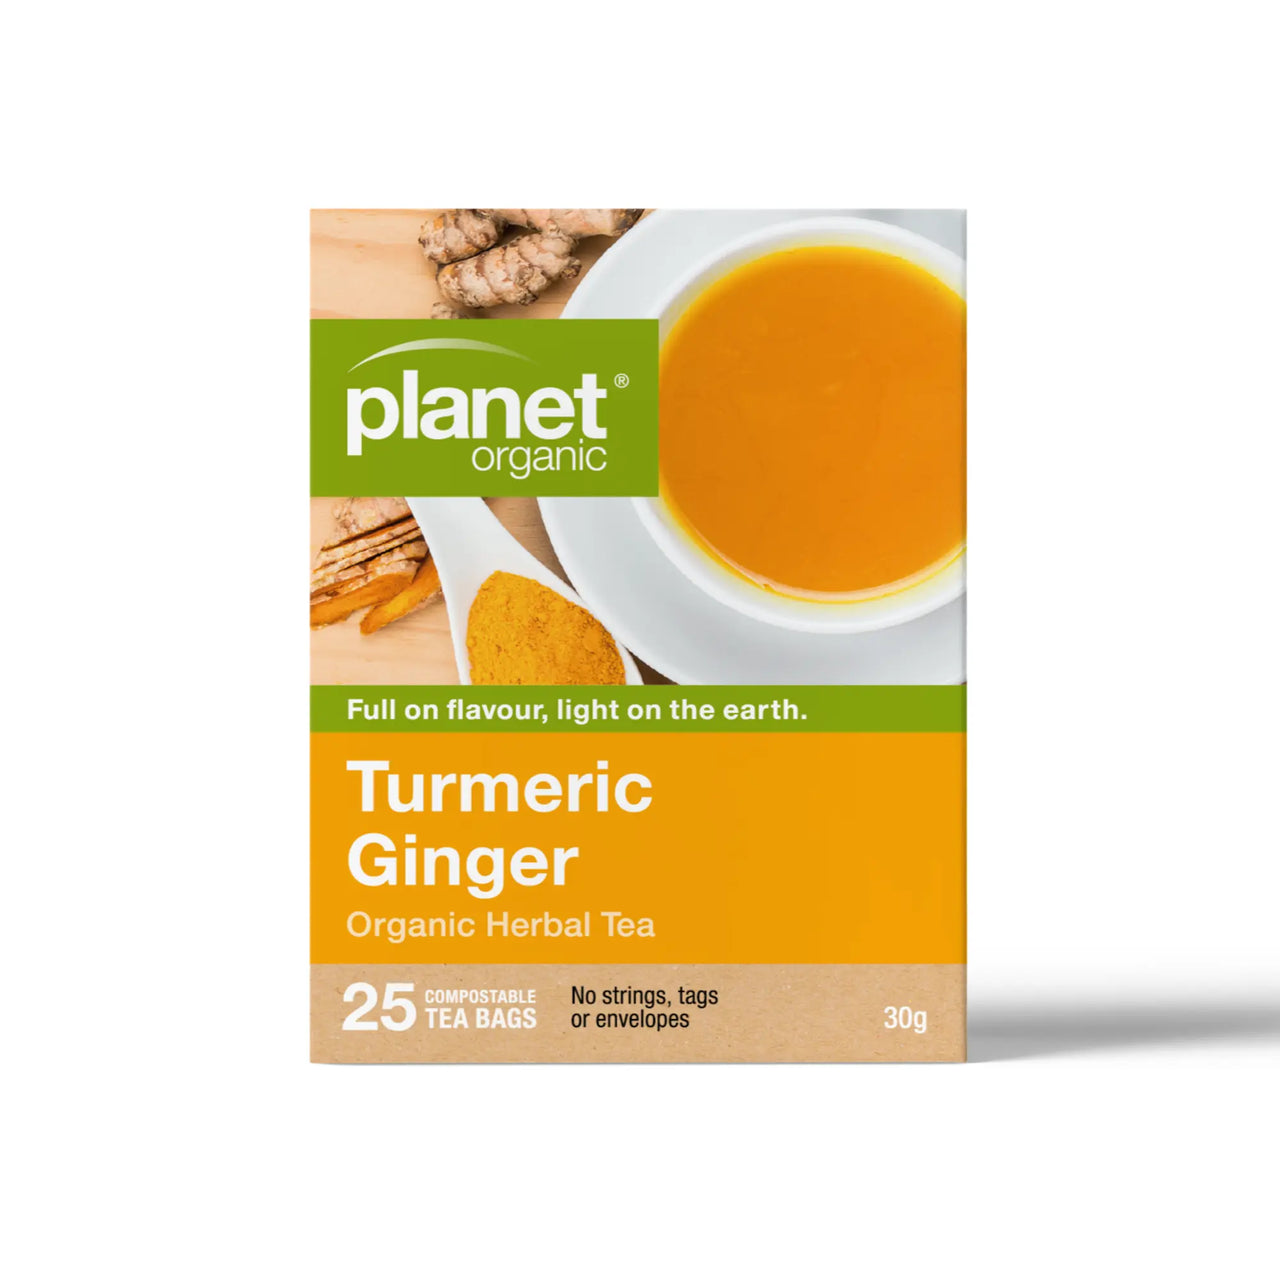 Turmeric and Ginger Drink for Inflammation - Certified Organic